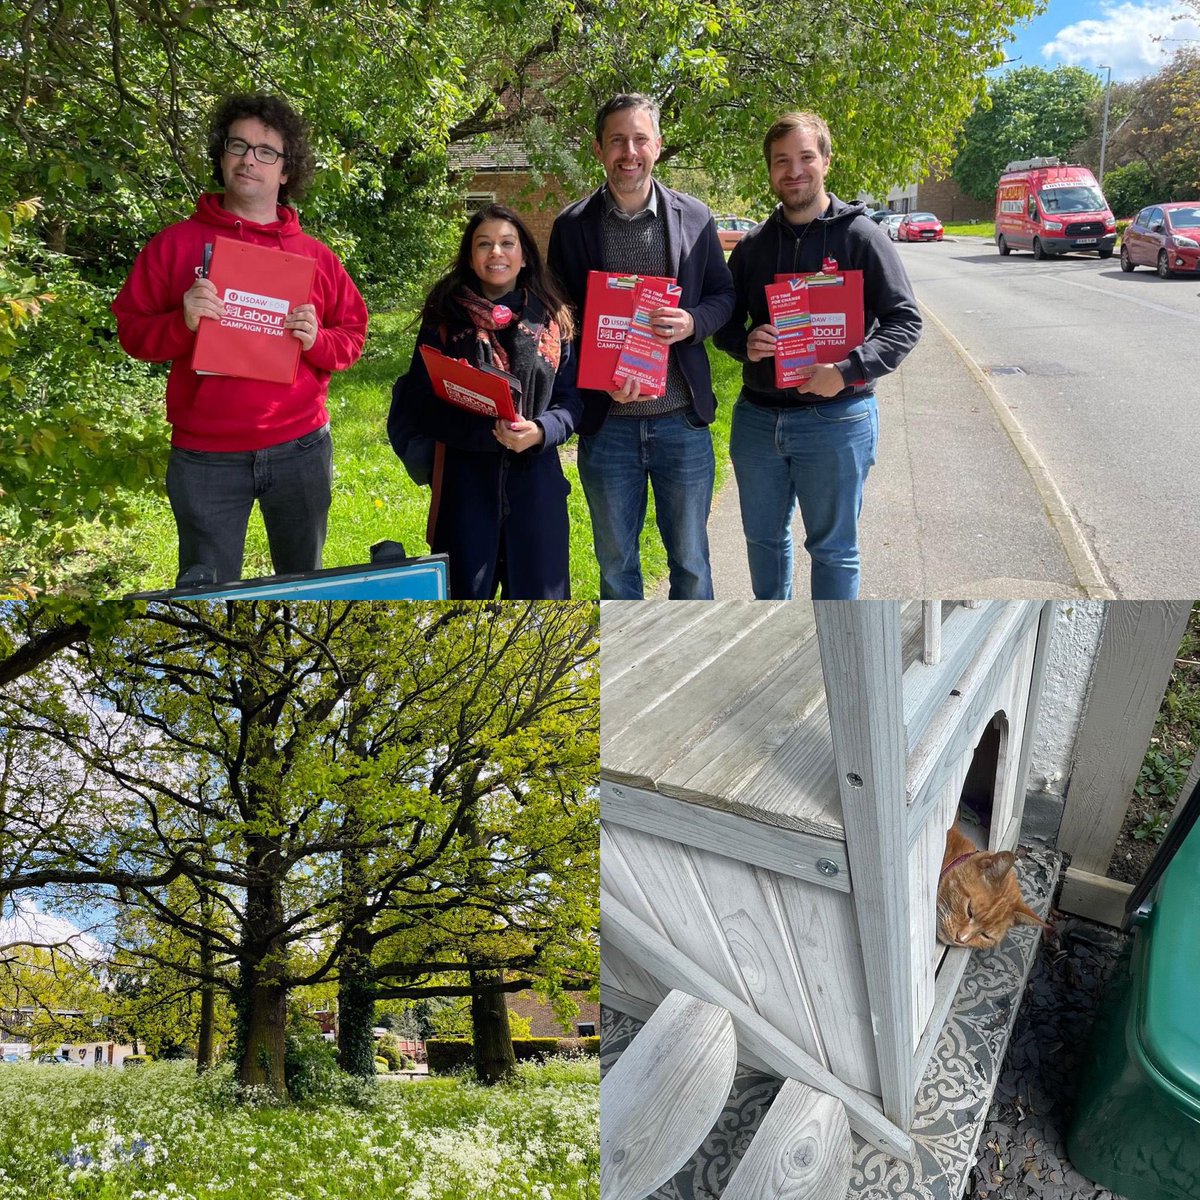 I had a great time in the sunshine in Harlow today with @ChrisJVince and @HarlowLabour. Lots of big smiles and positive energy in the run up to locals on #2ndMay! The people of Harlow are excited for change and know that @UKLabour will deliver on their priorities!